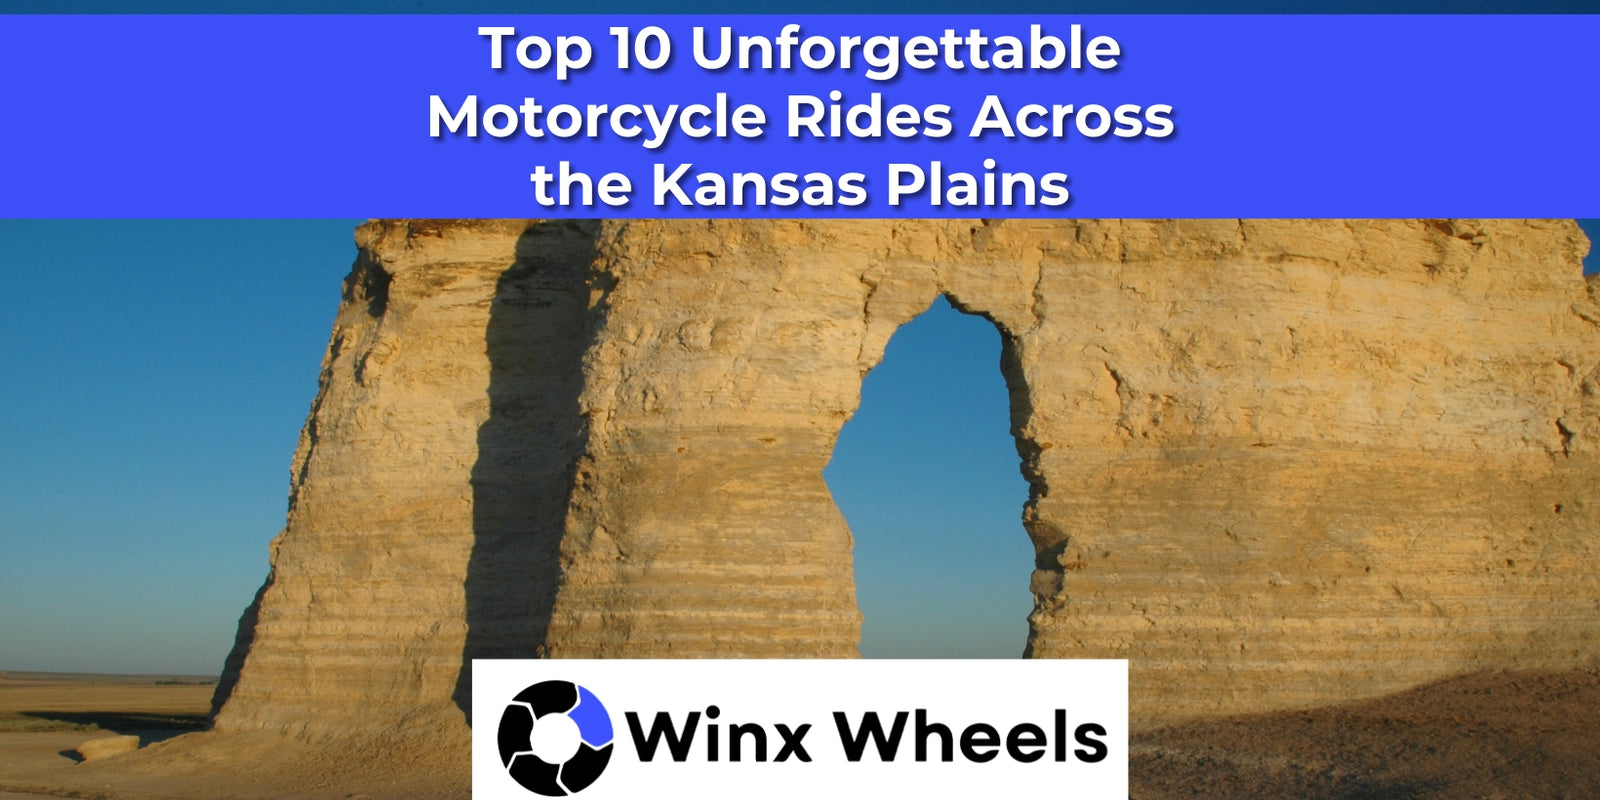 Top 10 Unforgettable Motorcycle Rides Across the Kansas Plains